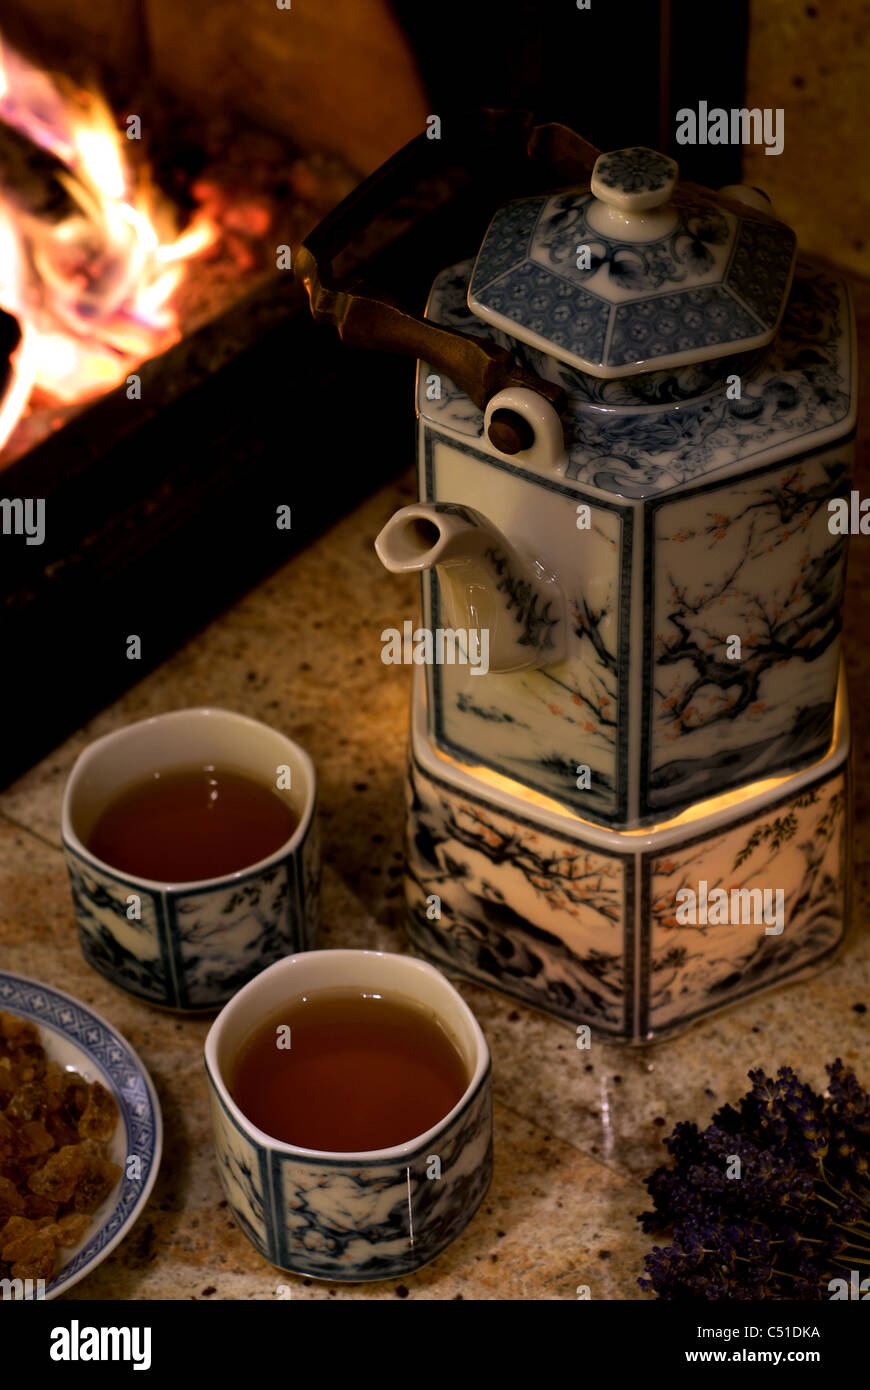 A tea ceremony at a fireplace Stock Photo